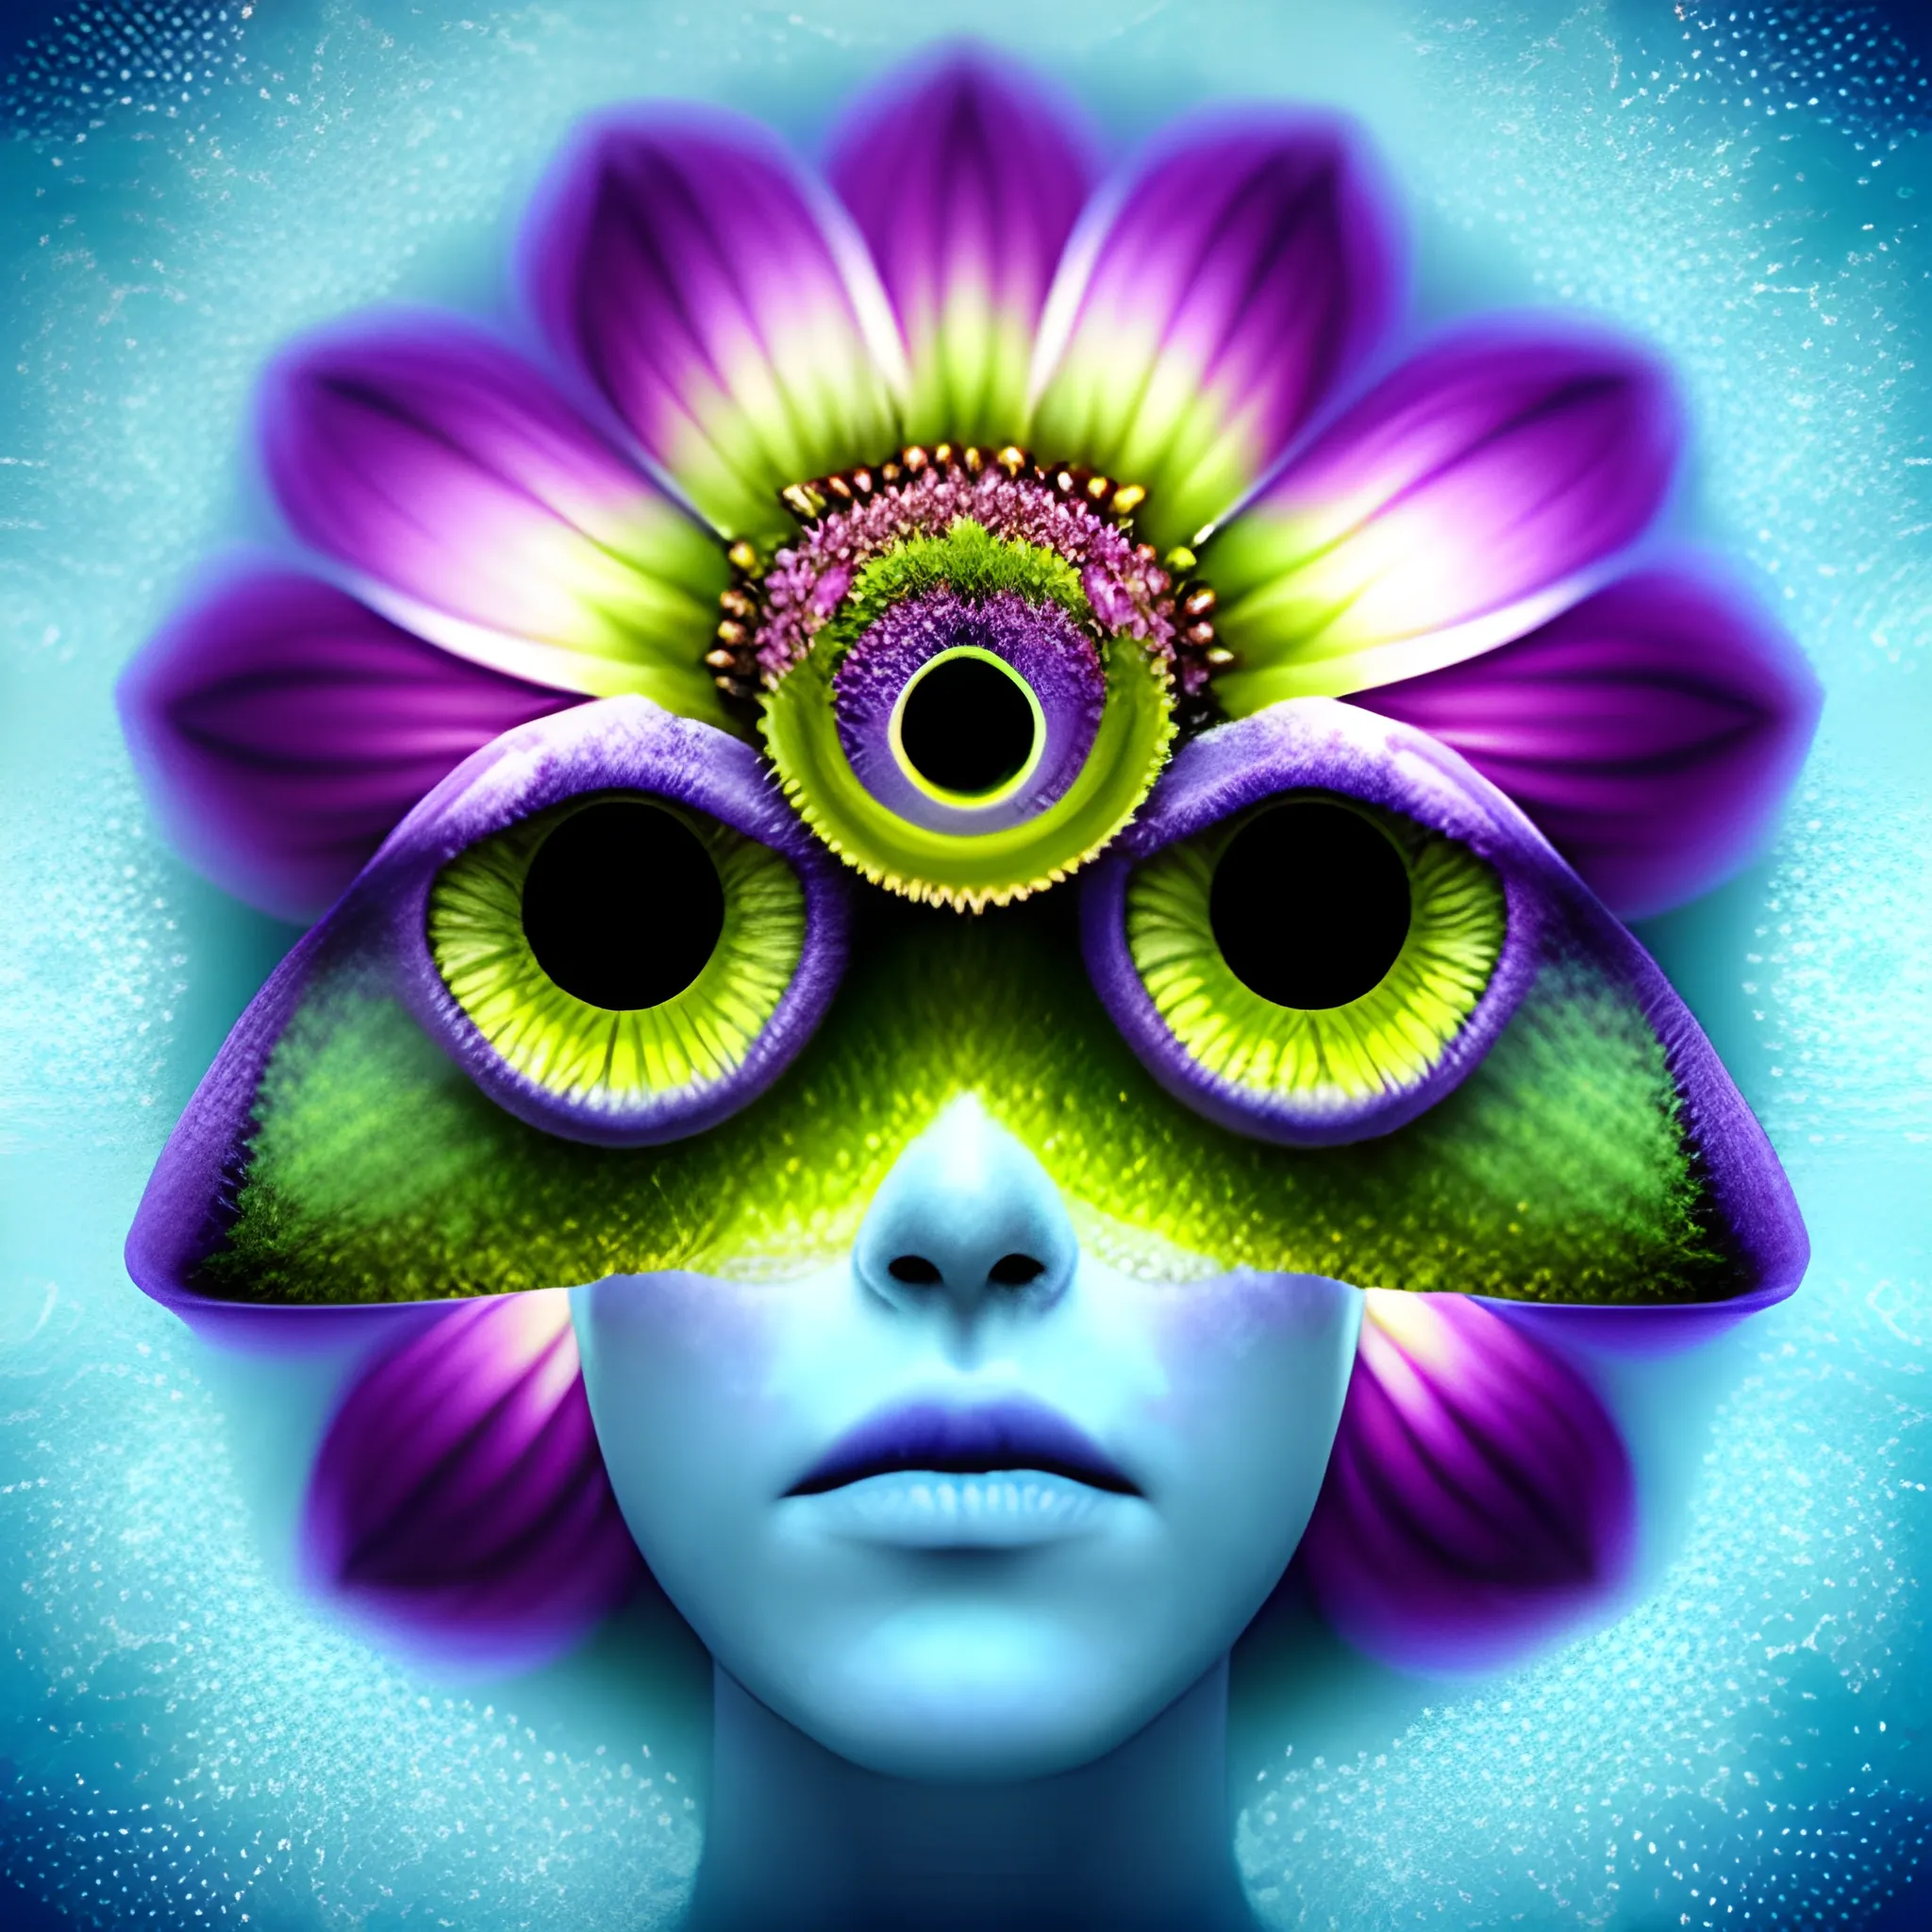 a dreamy flower with human eyes inside on its petals, Trippy